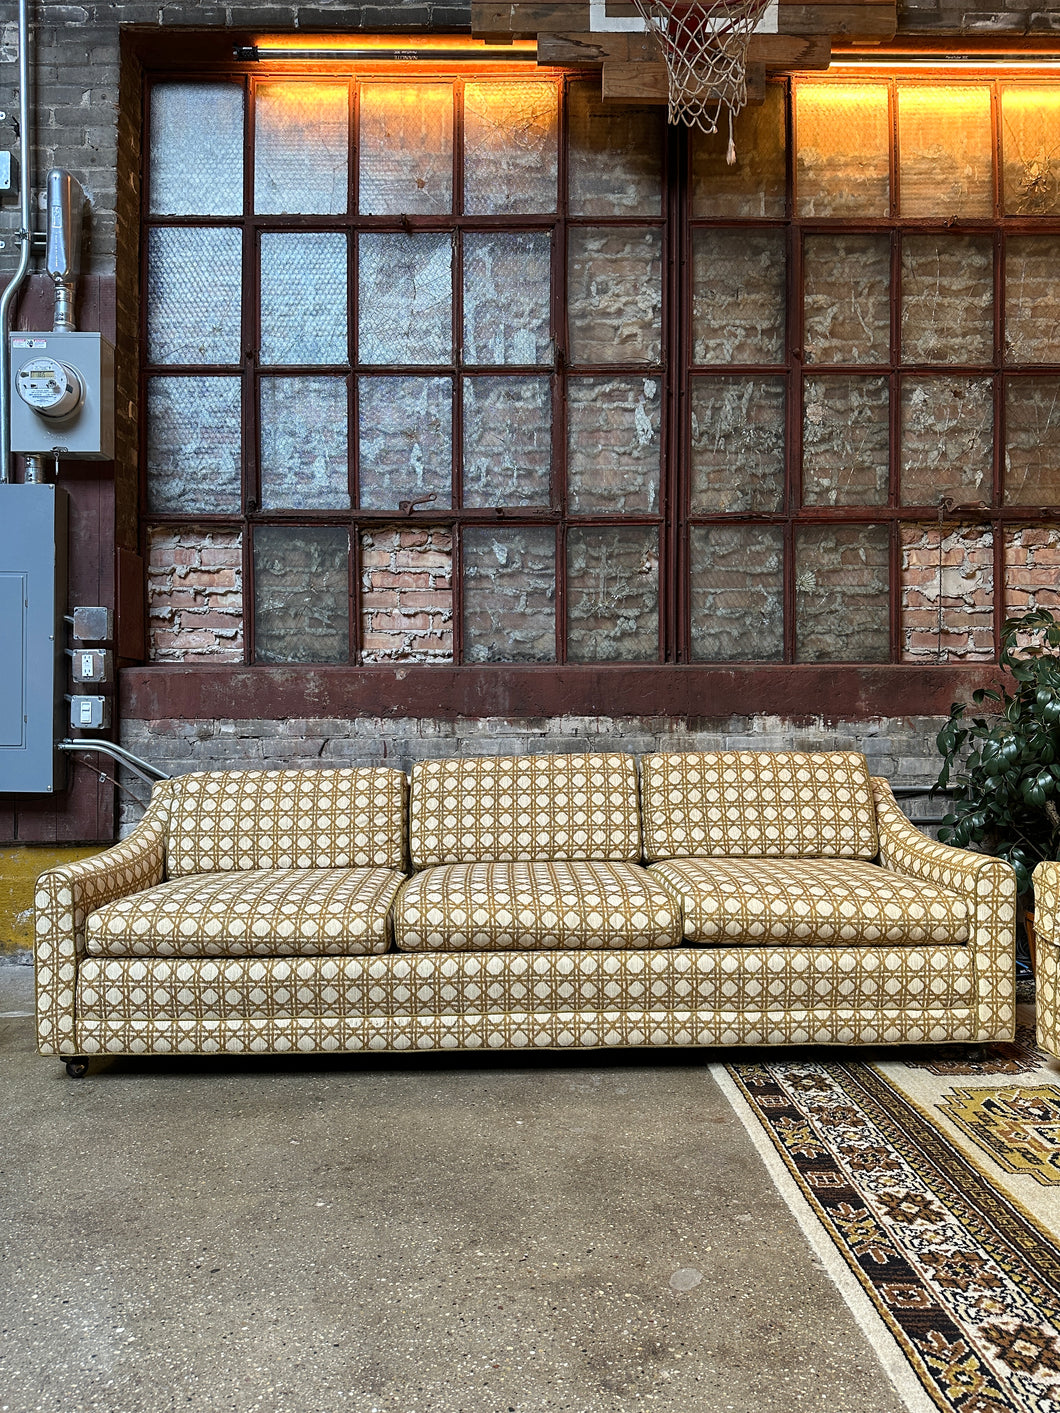 Cane-Patterned Couch